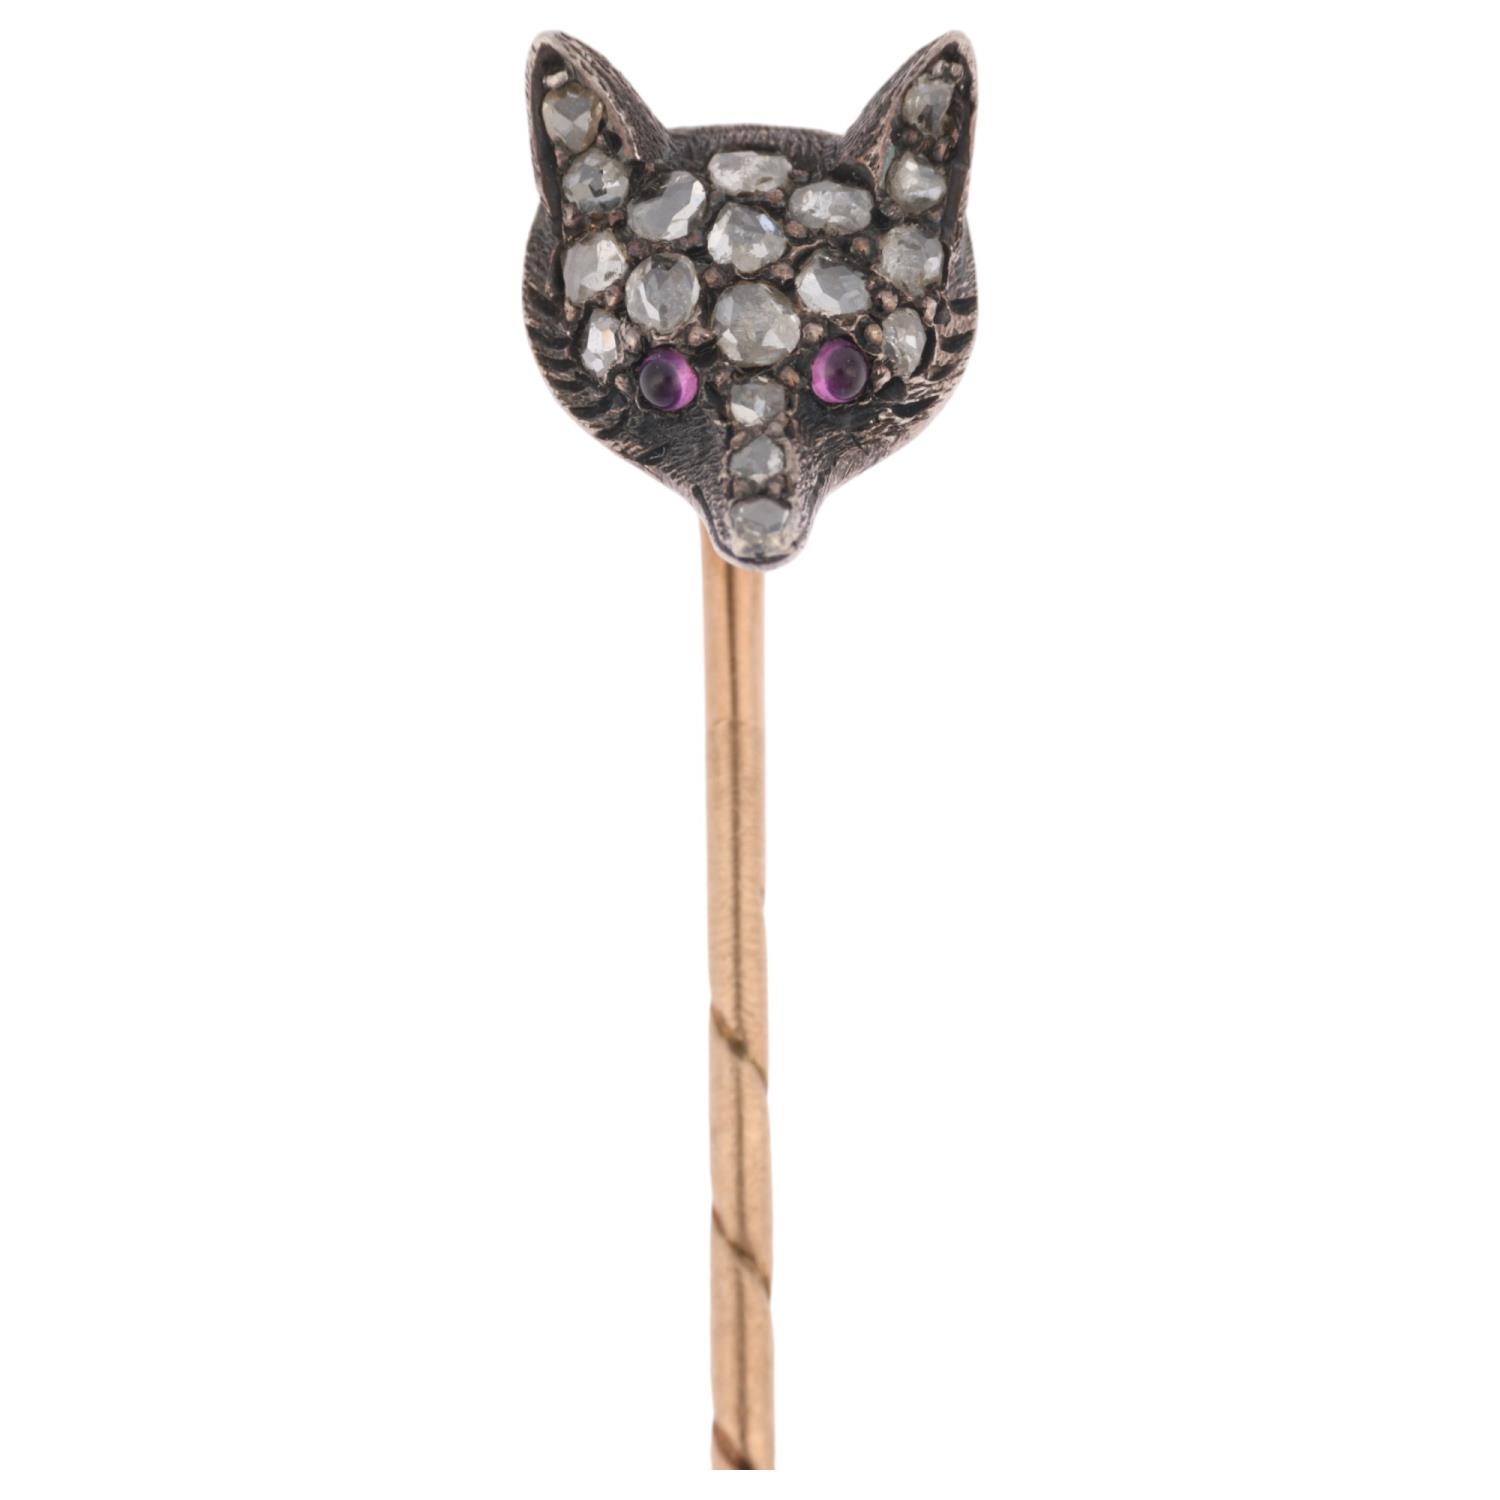 An Antique ruby and diamond fox-head stickpin, circa 1900, pave set with round cabochon ruby eyes